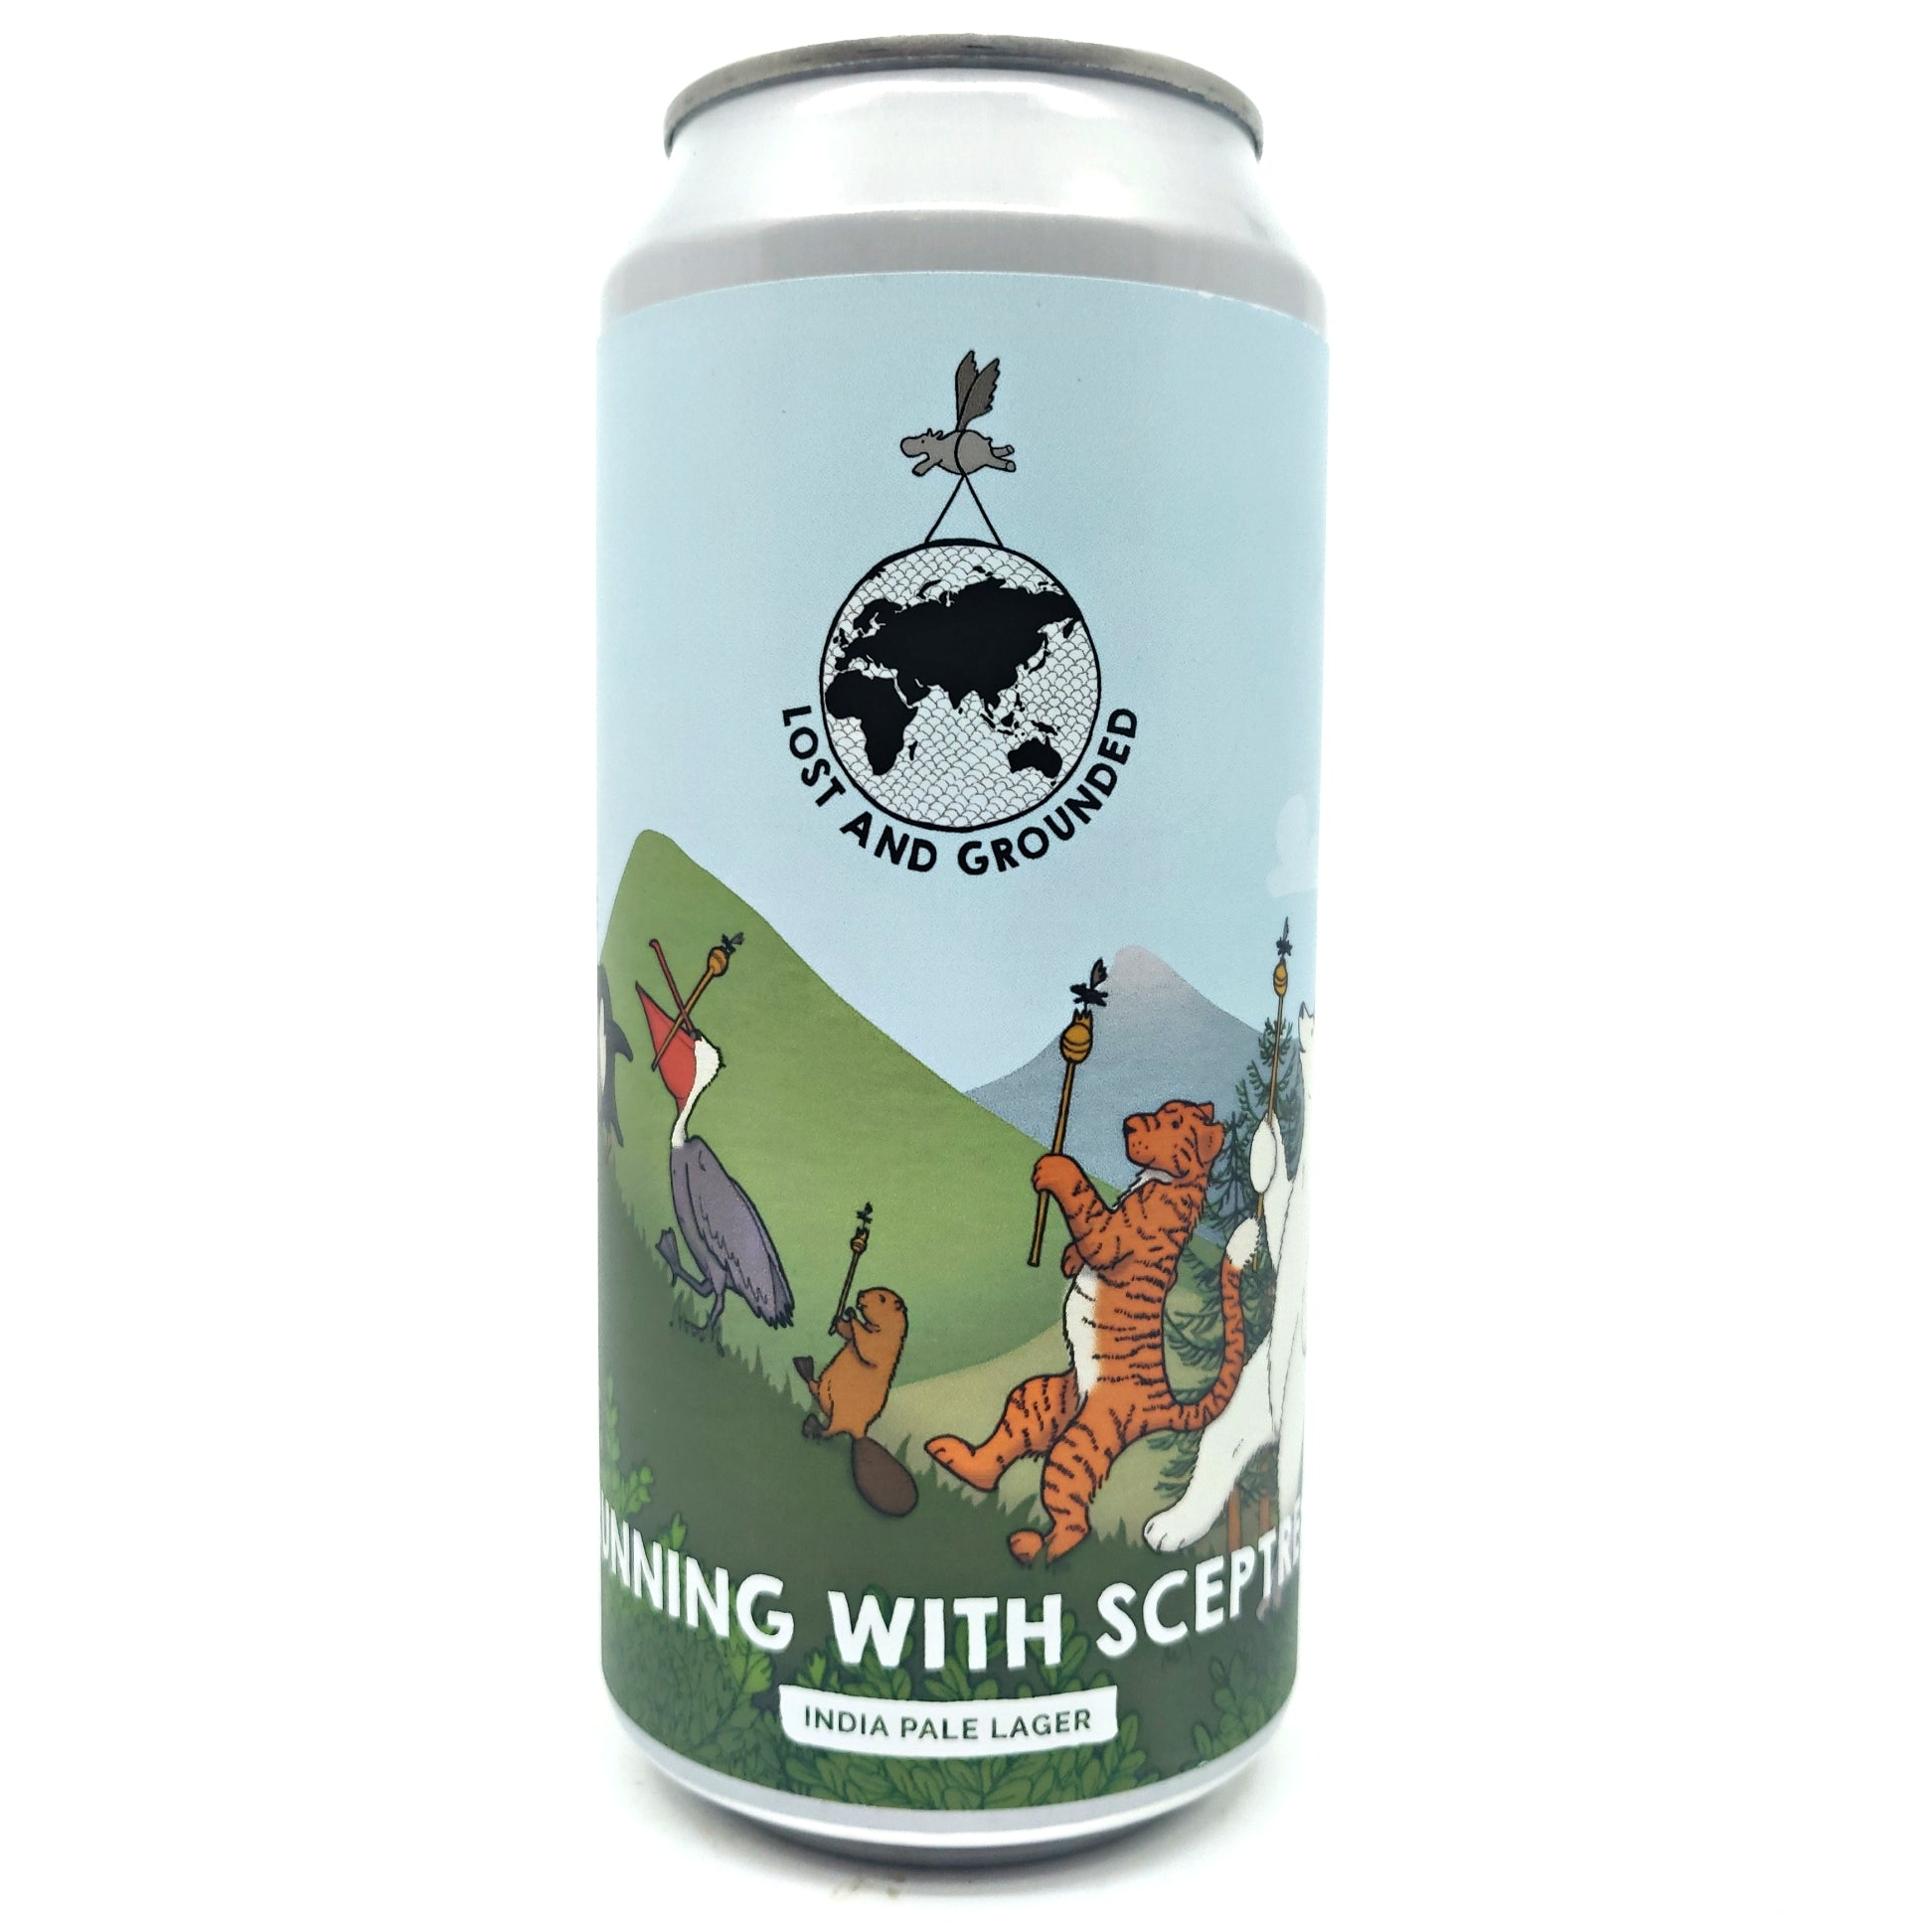 Lost & Grounded Running with Sceptres IPL 4.8% (440ml can)-Hop Burns & Black